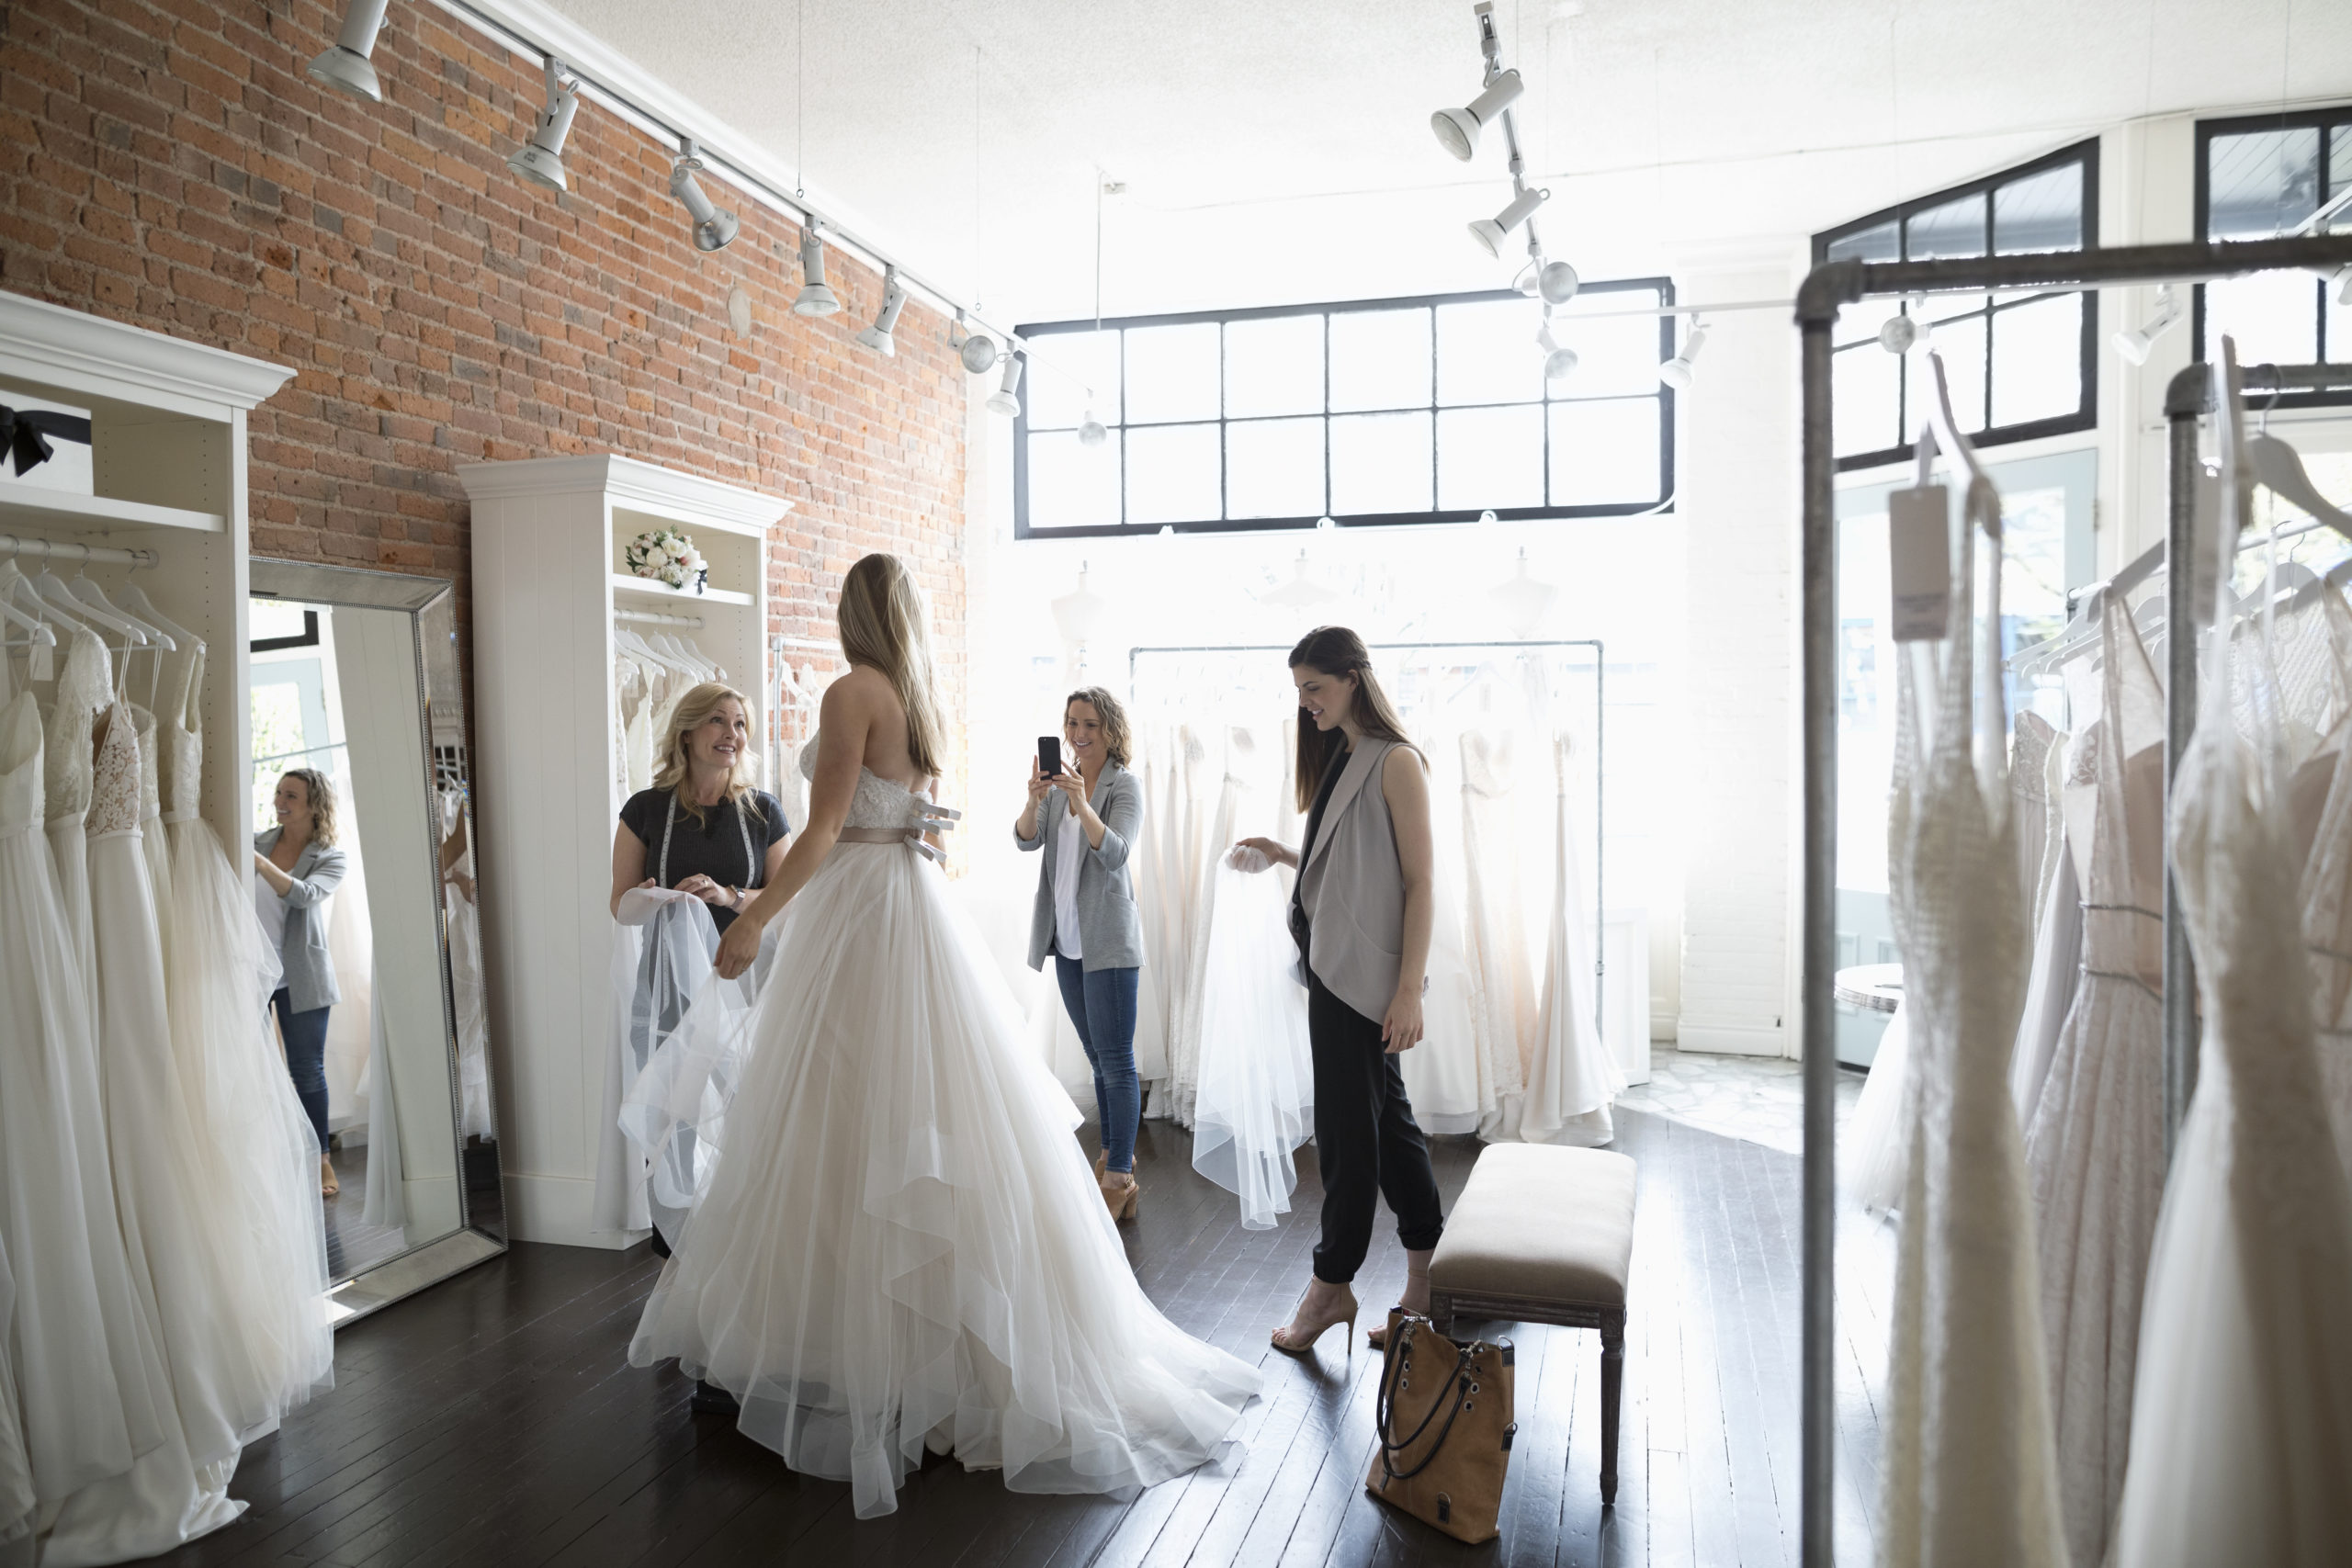 The stores charging brides 100 just to try on a wedding dress Star